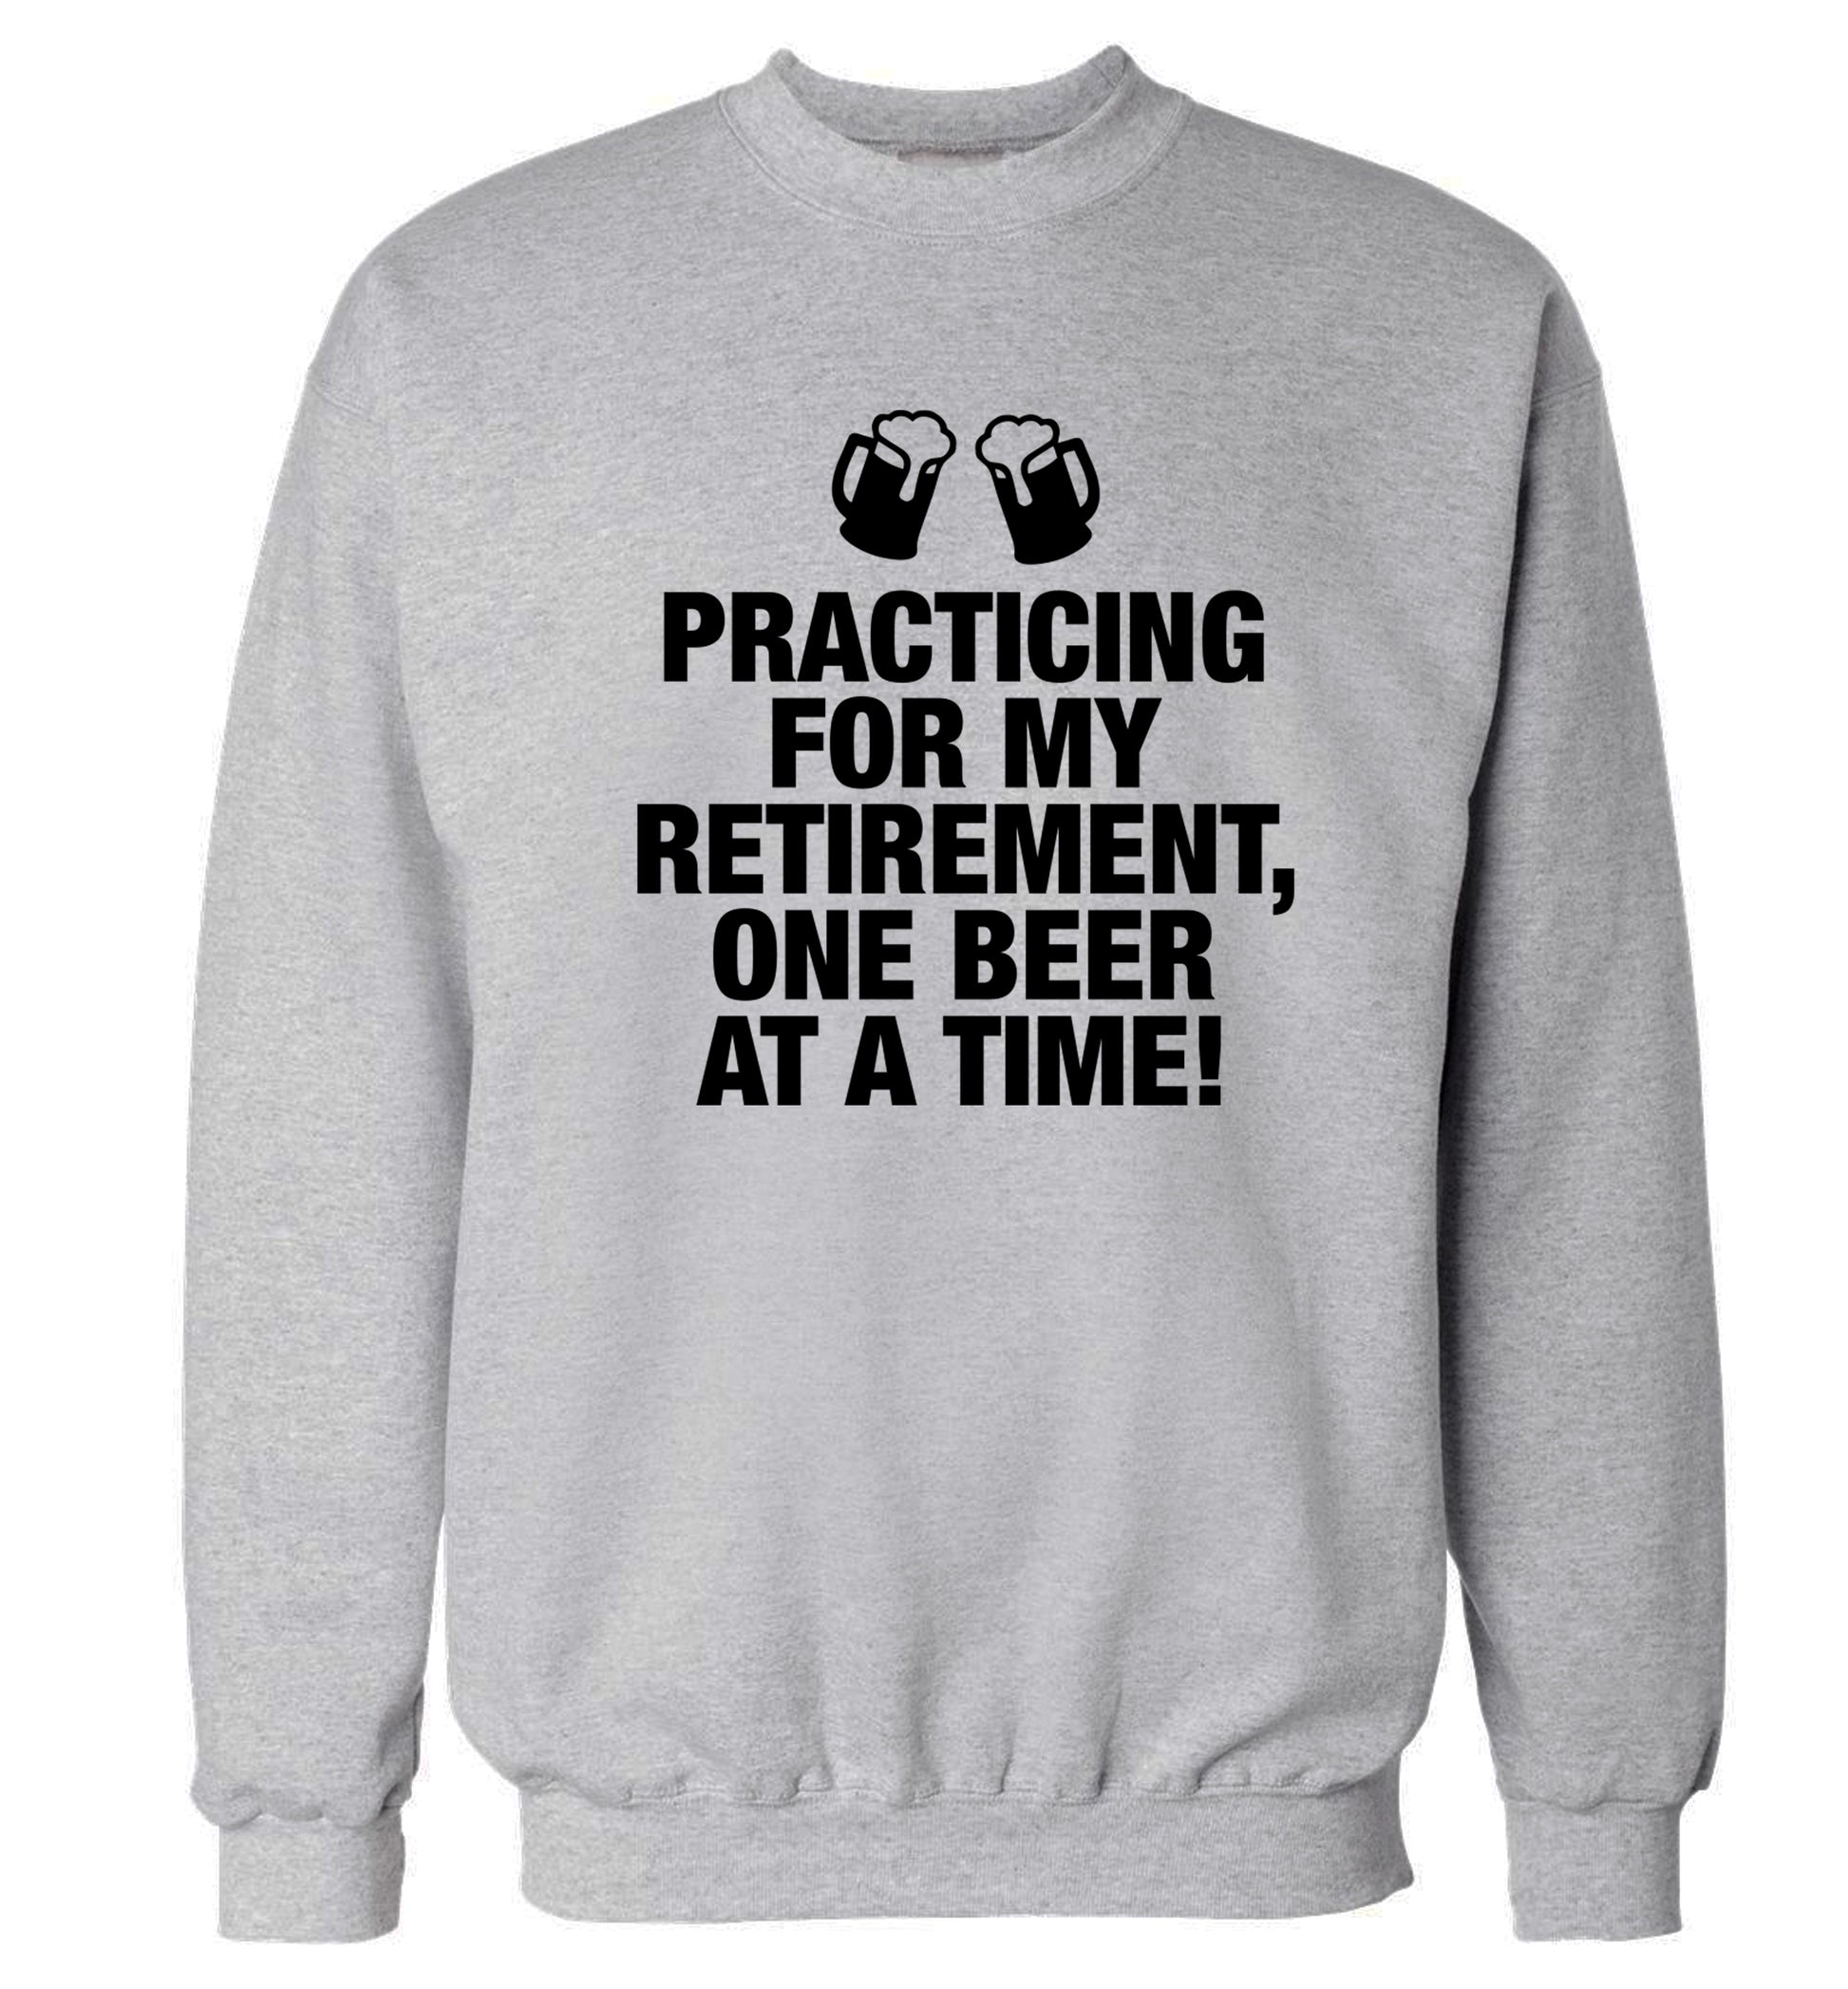 Practicing my retirement one beer at a time Adult's unisex grey Sweater 2XL